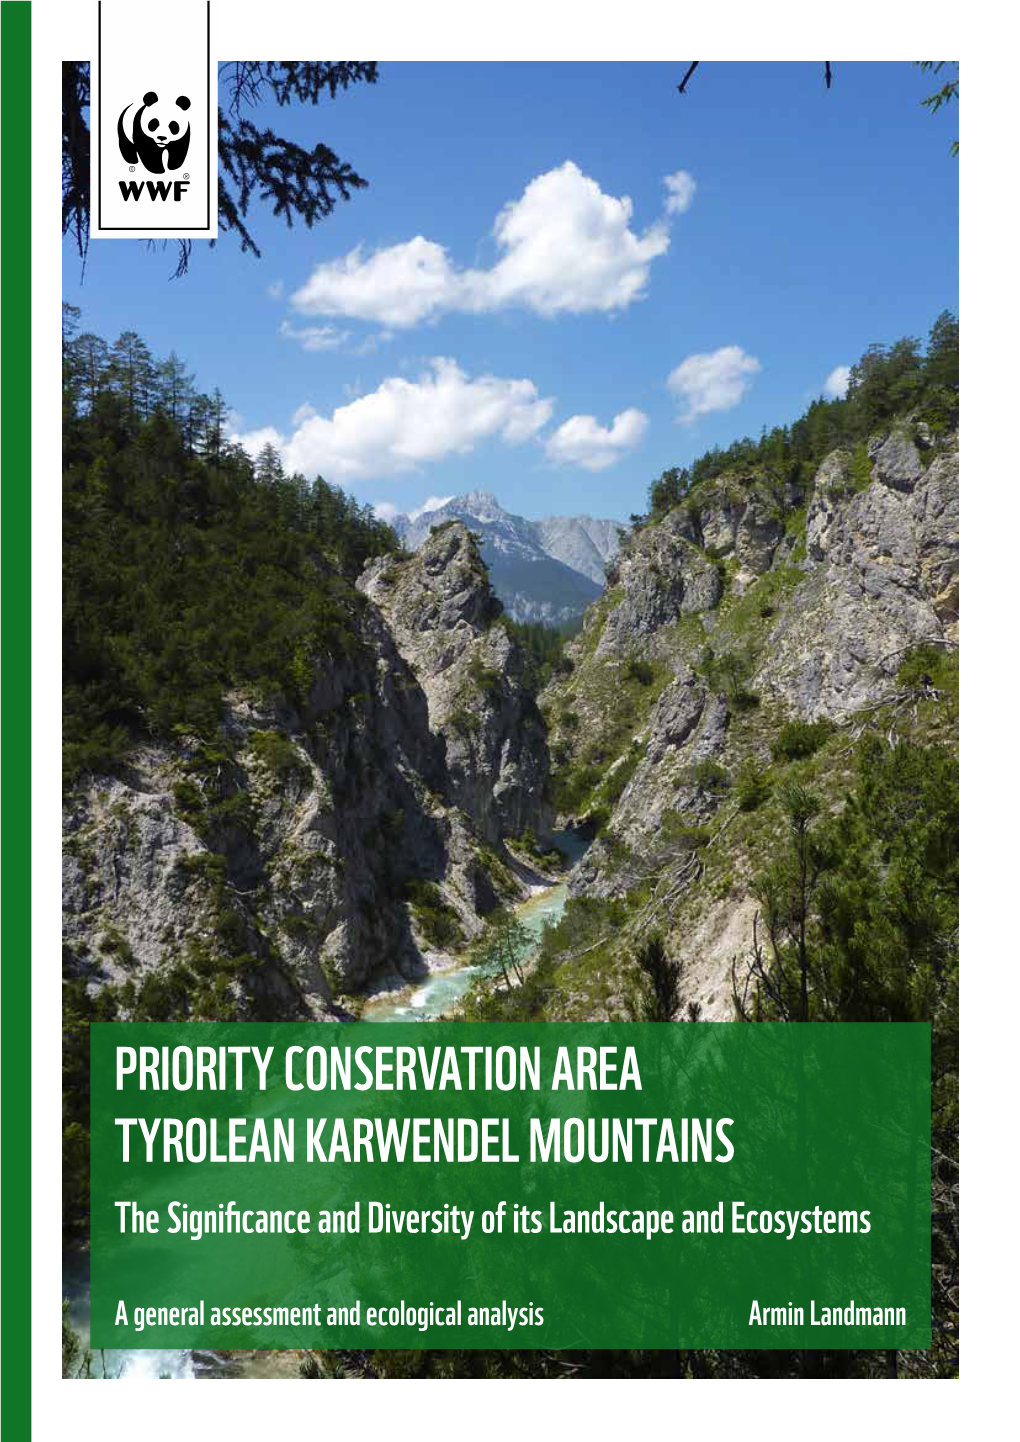 PRIORITY CONSERVATION AREA TYROLEAN KARWENDEL MOUNTAINS the Significance and Diversity of Its Landscape and Ecosystems